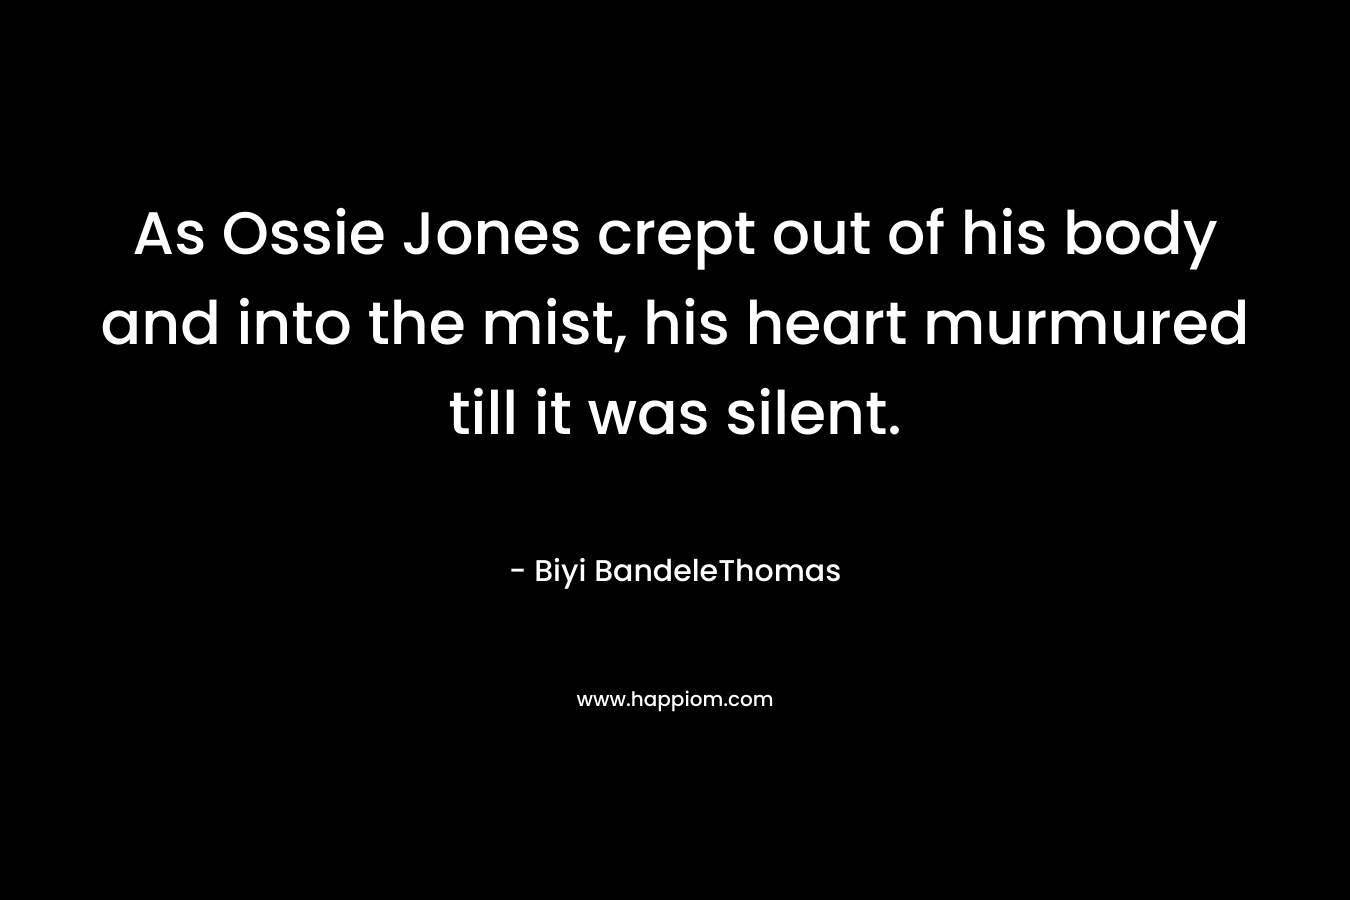 As Ossie Jones crept out of his body and into the mist, his heart murmured till it was silent.